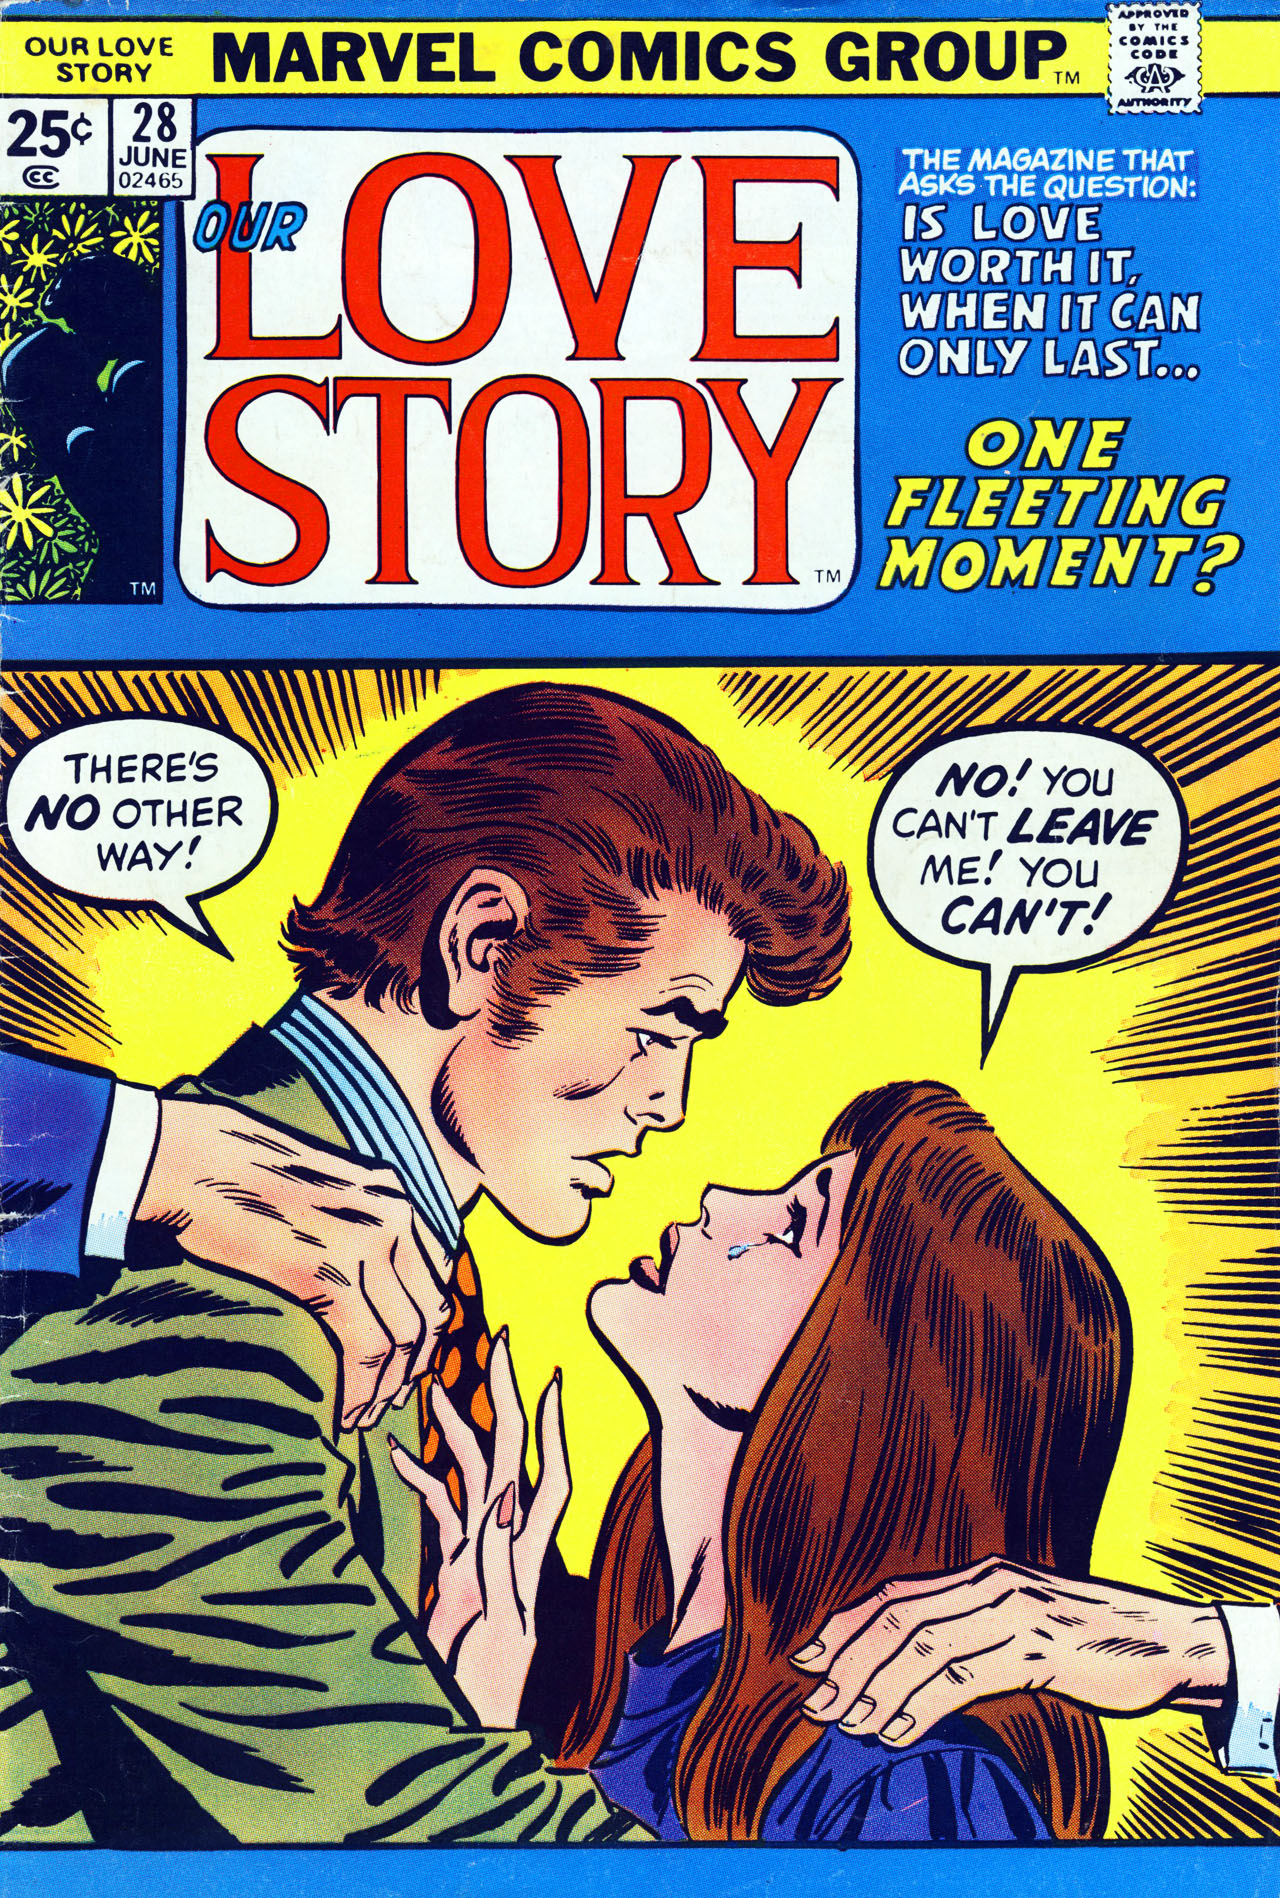 Read online Our Love Story comic -  Issue #28 - 1